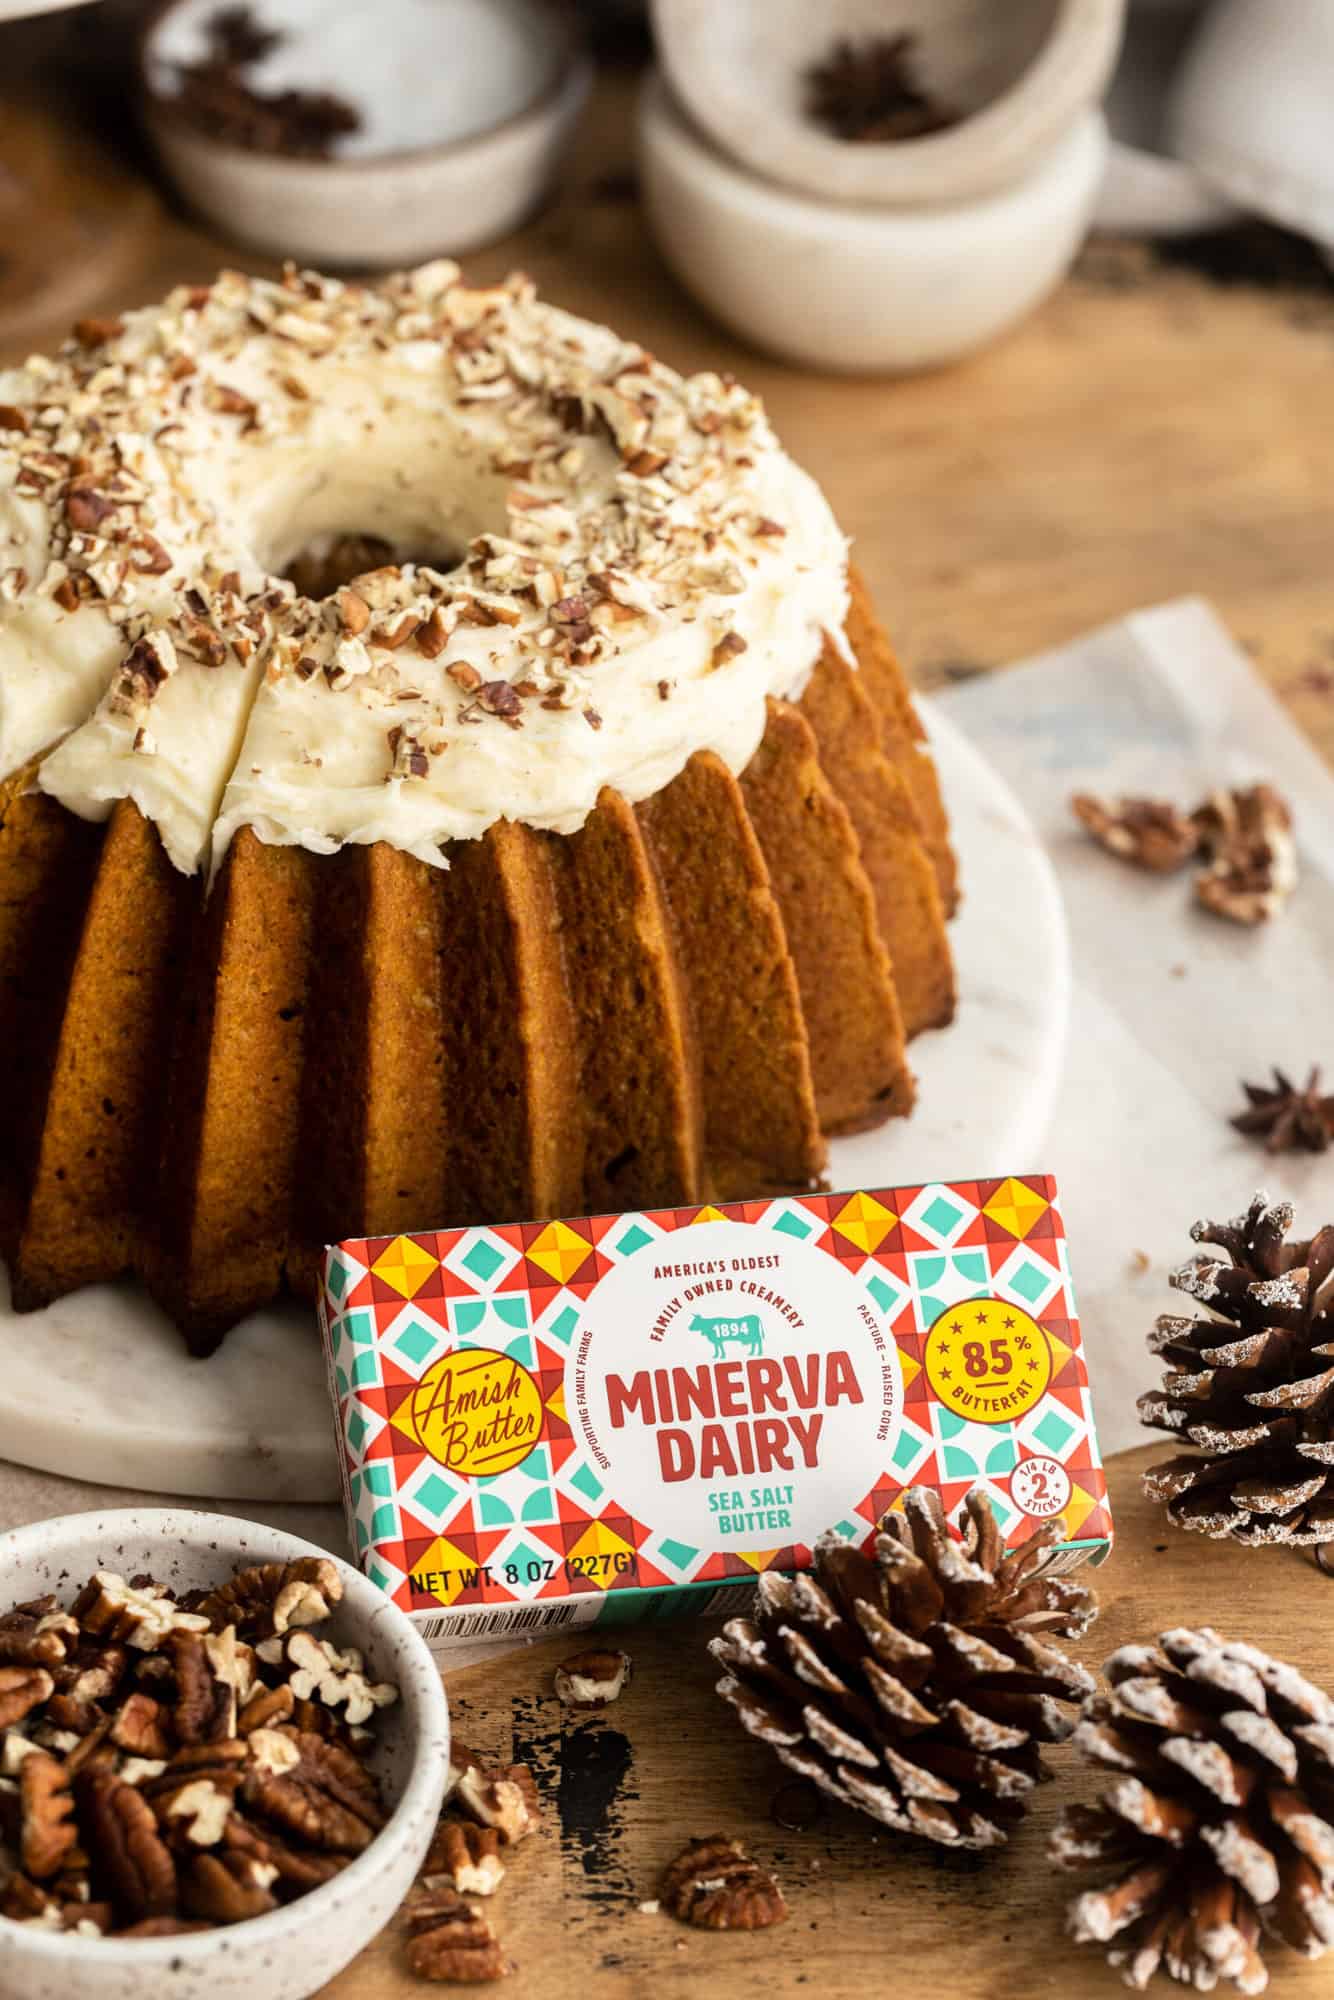 A whole plated Sweet Potato Pound Cake with a package of Minerva Dairy Butter placed in front of it.